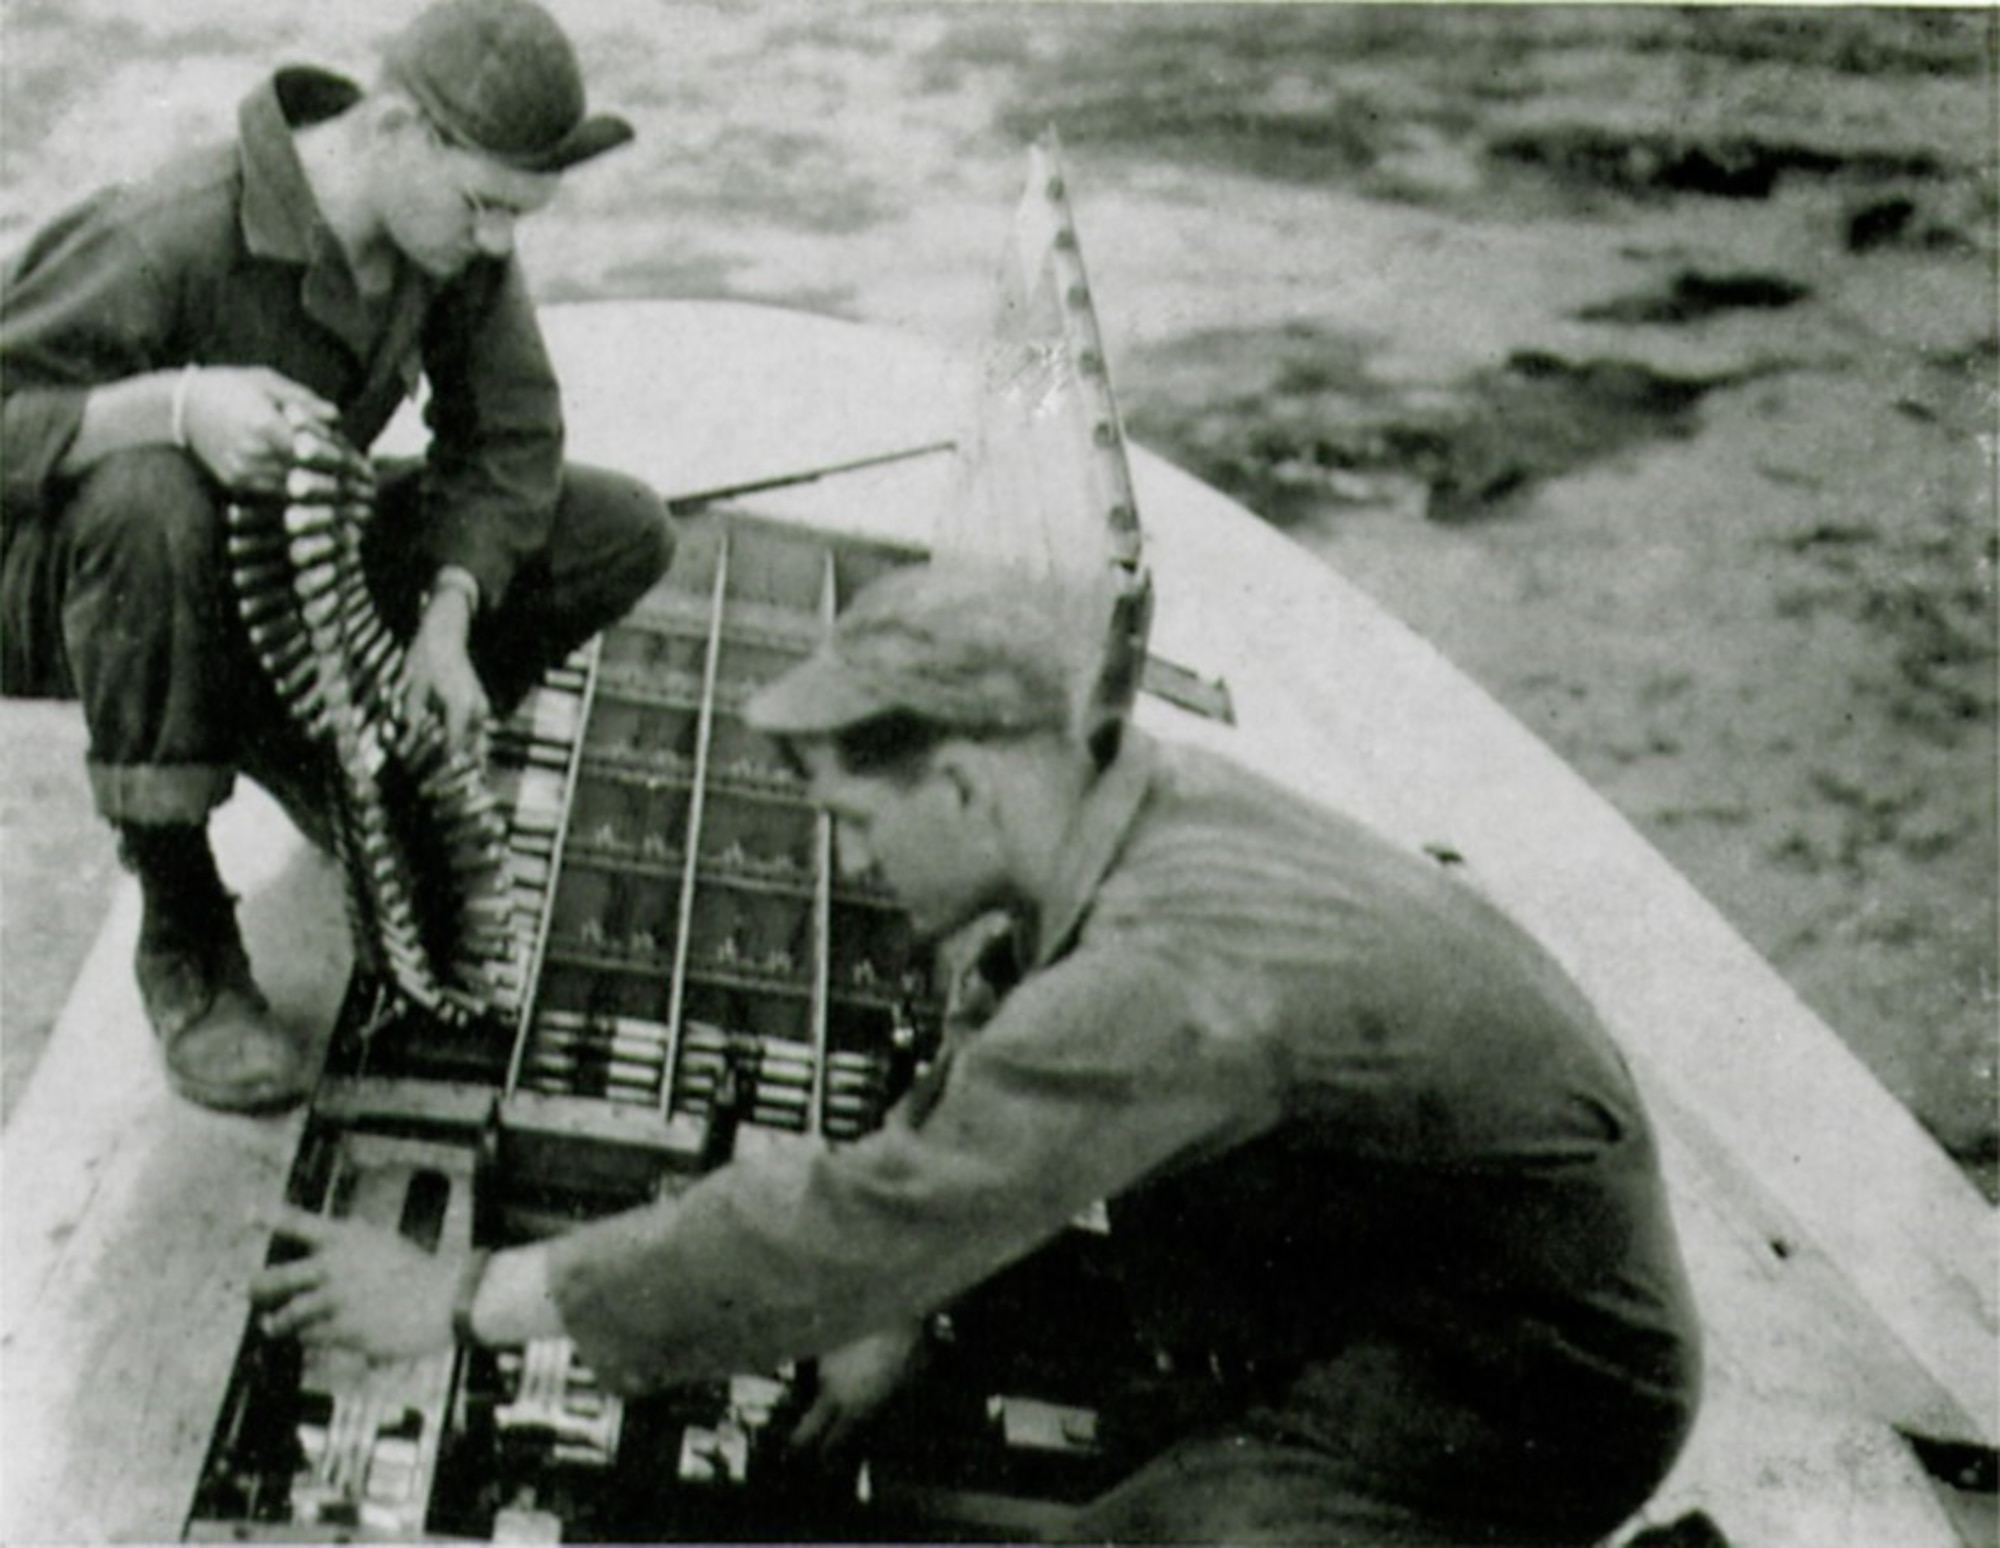 Armorers Sgt. Douglas J. Wood and Sgt. Robert C. Dyson of the 406th Fighter Squadron “loading them hot.” (The Story of the 371st Fighter Group in the E.T.O.)